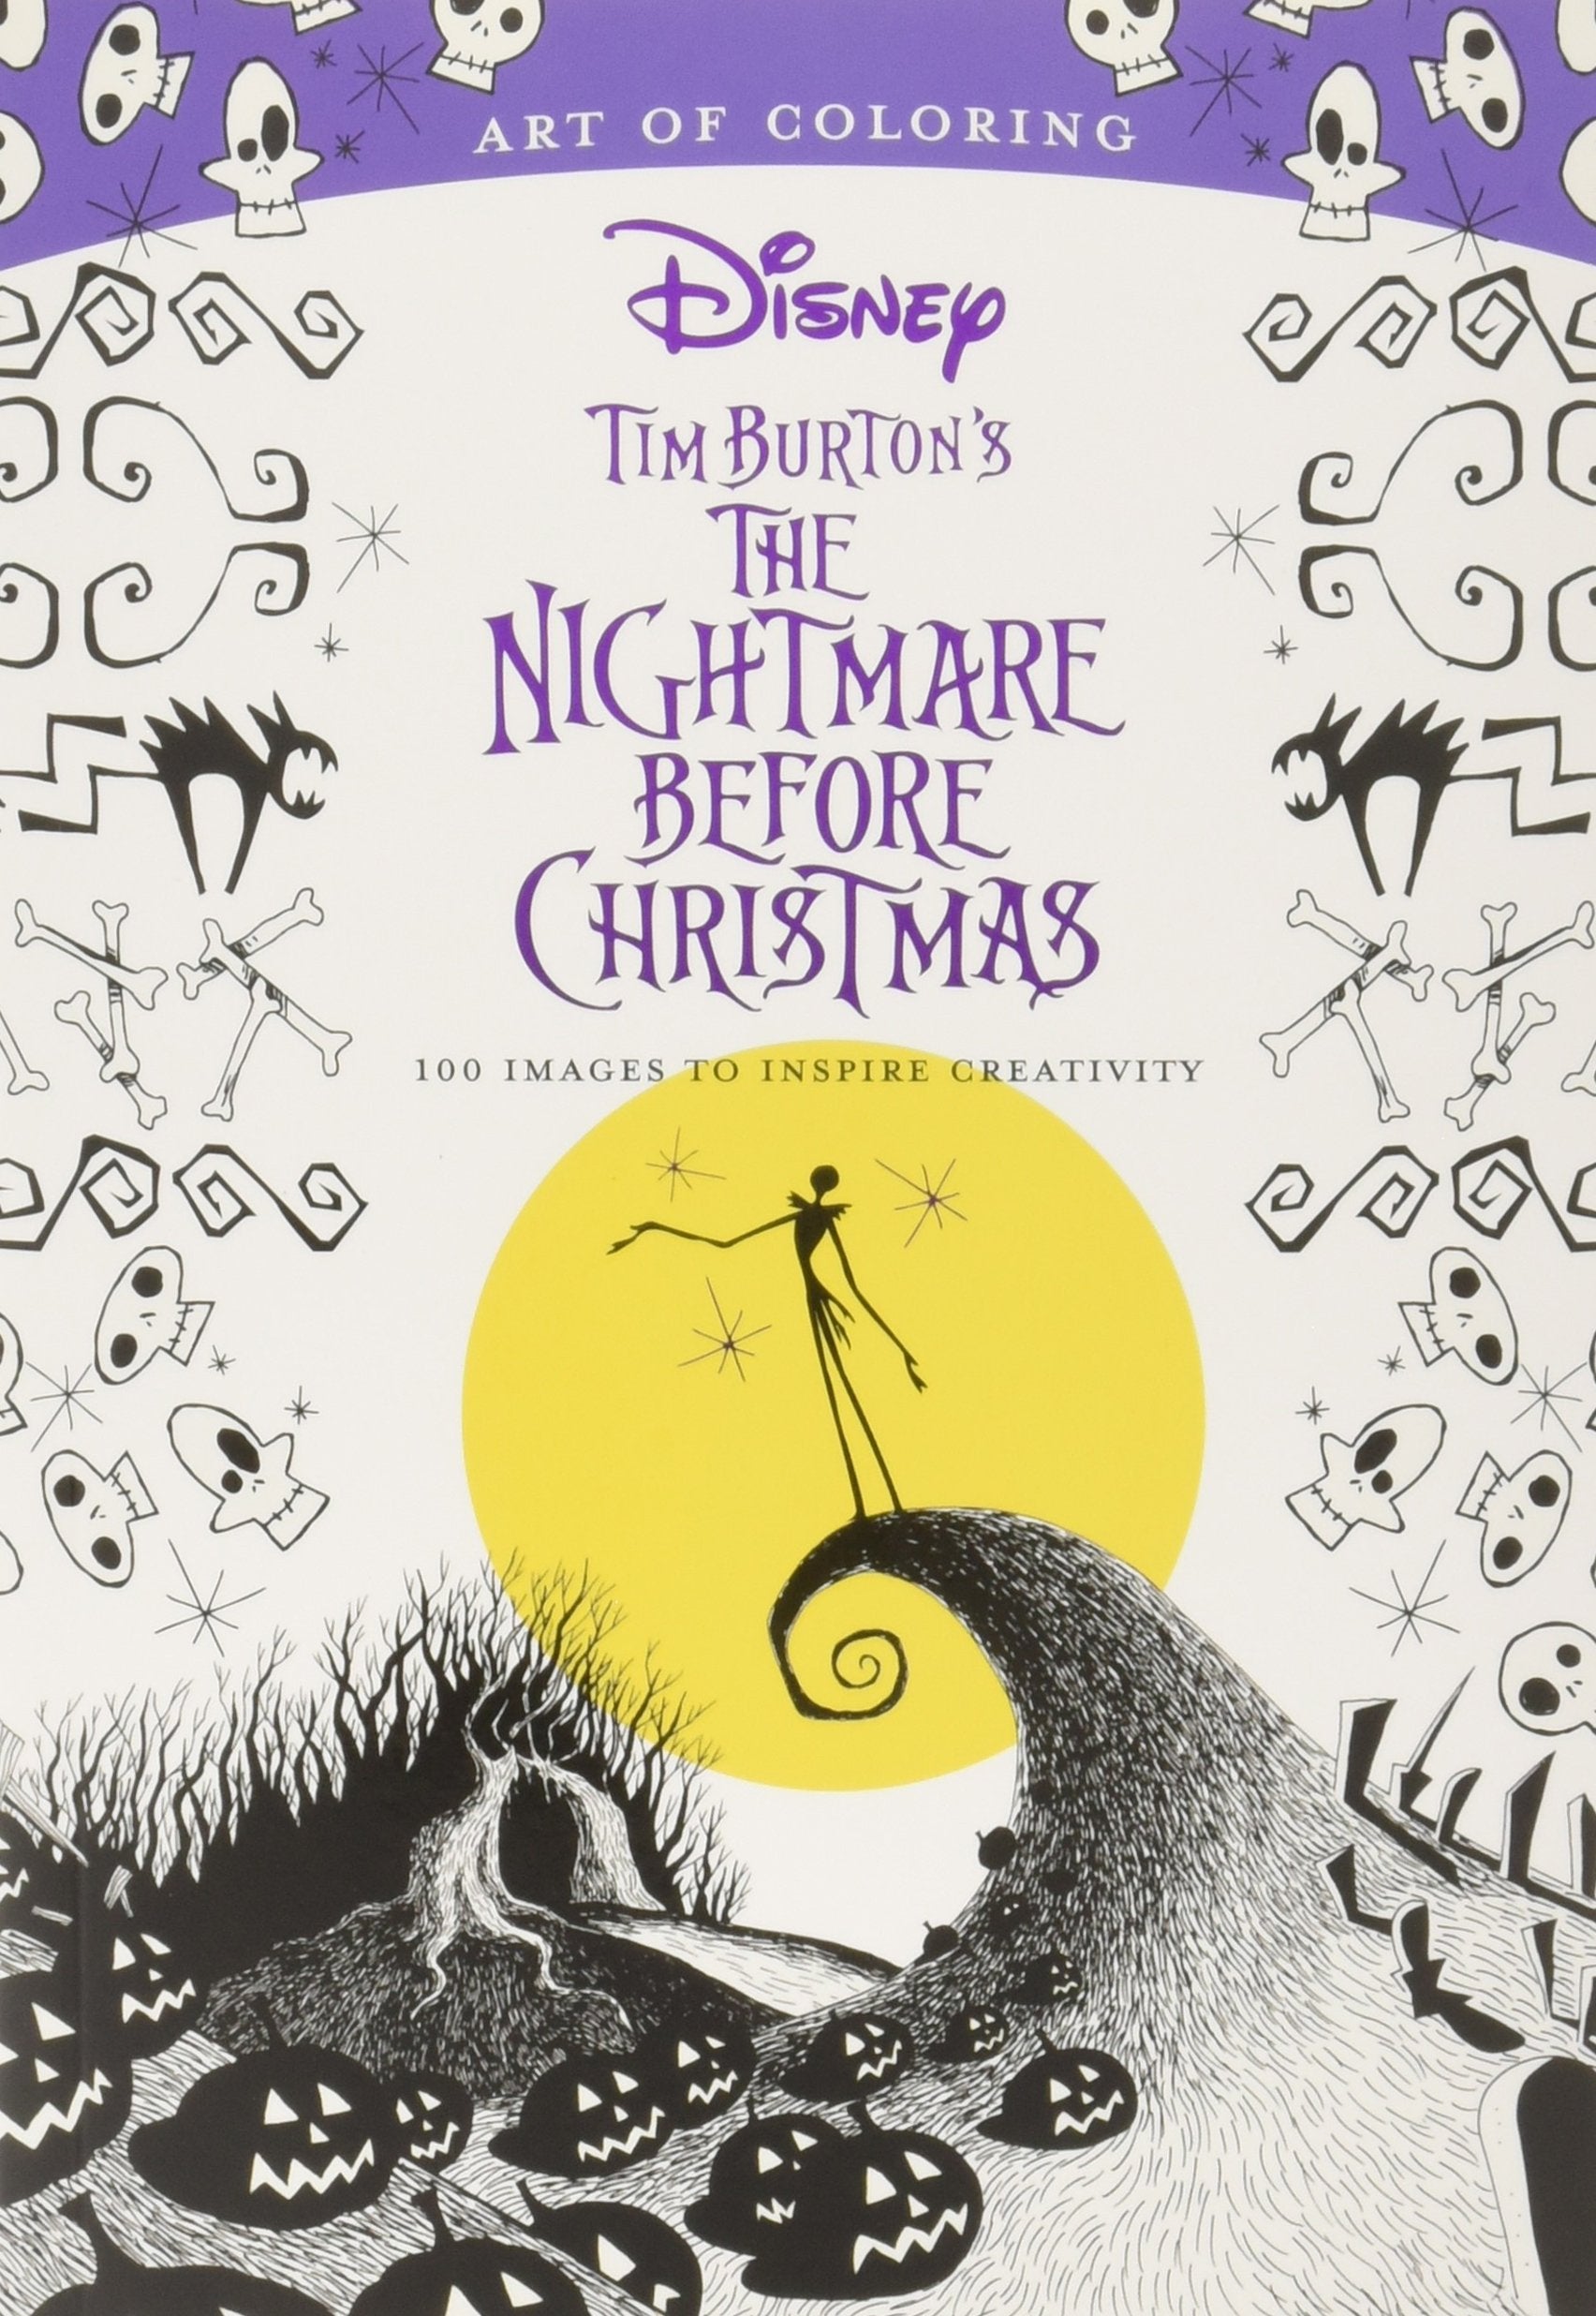 Art of Coloring: The Nightmare Before Christmas